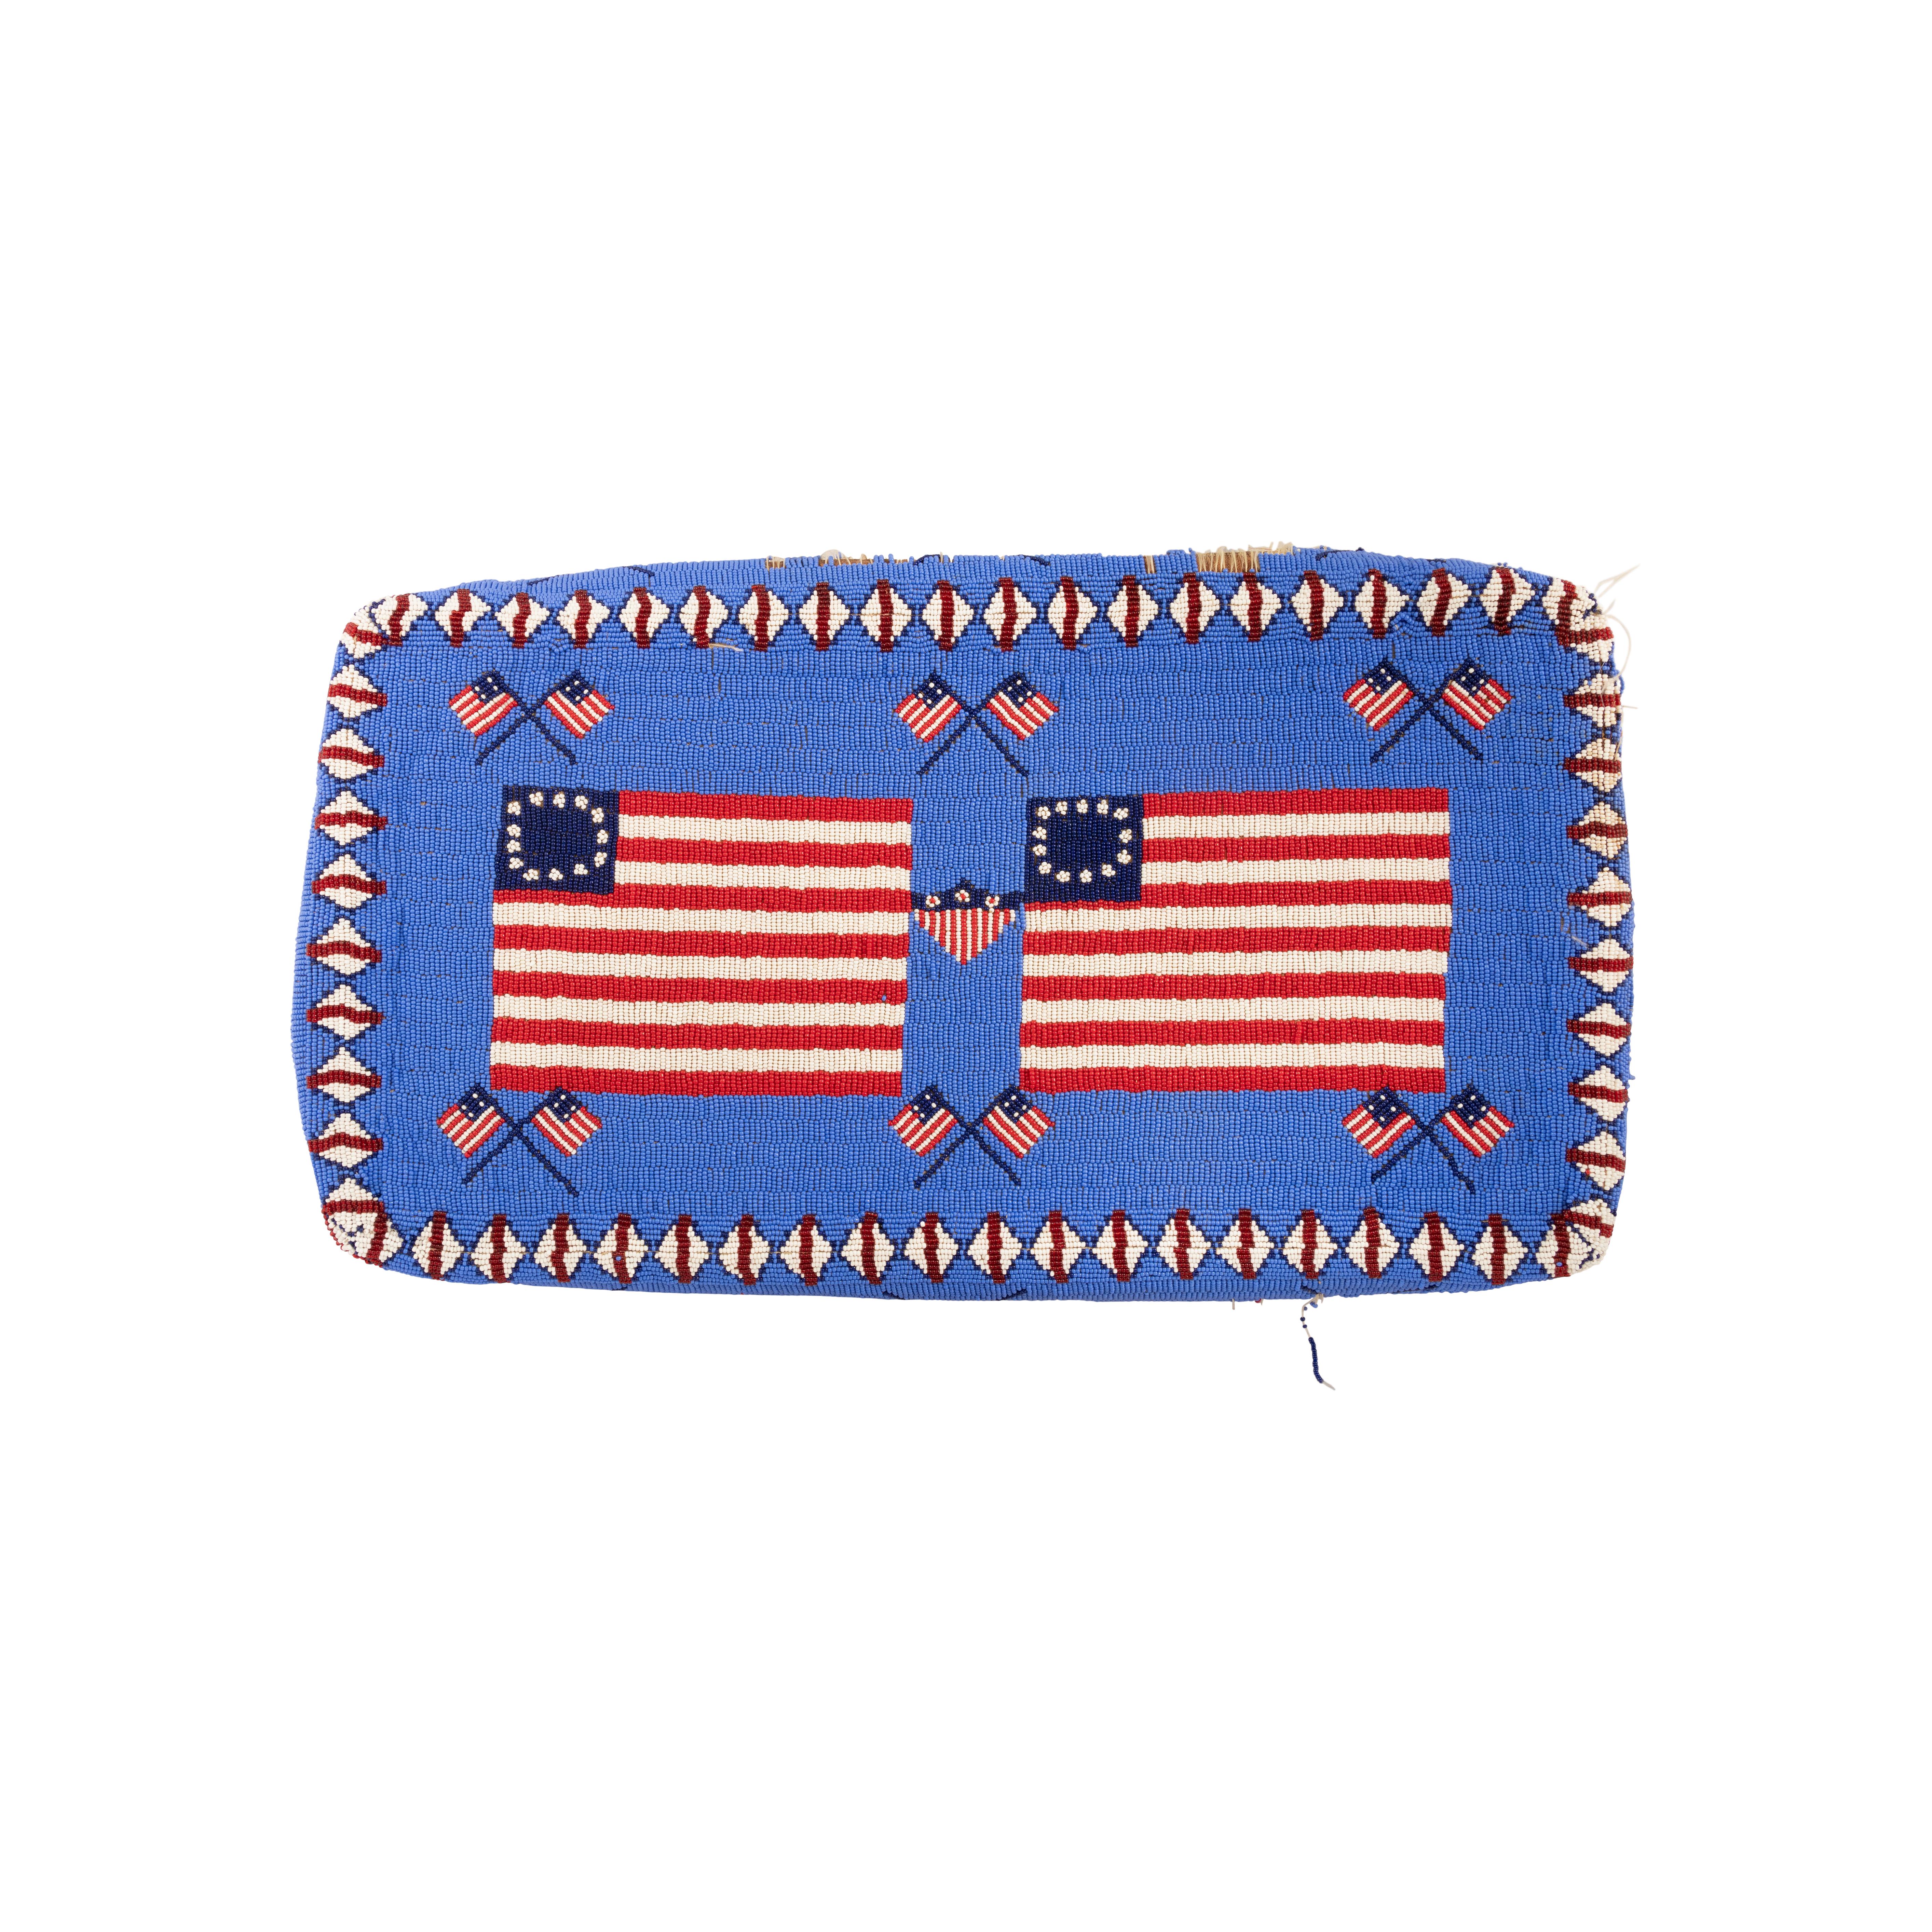 Patriotic Native American Sioux beaded doctor's bag. 62 American flags and crests. Large doctors bag; Sioux beaded. Came from a trading post in South Dakota; estimate first half 20th century, sold in the 1970's for $16,500. Bright, visual, patriotic